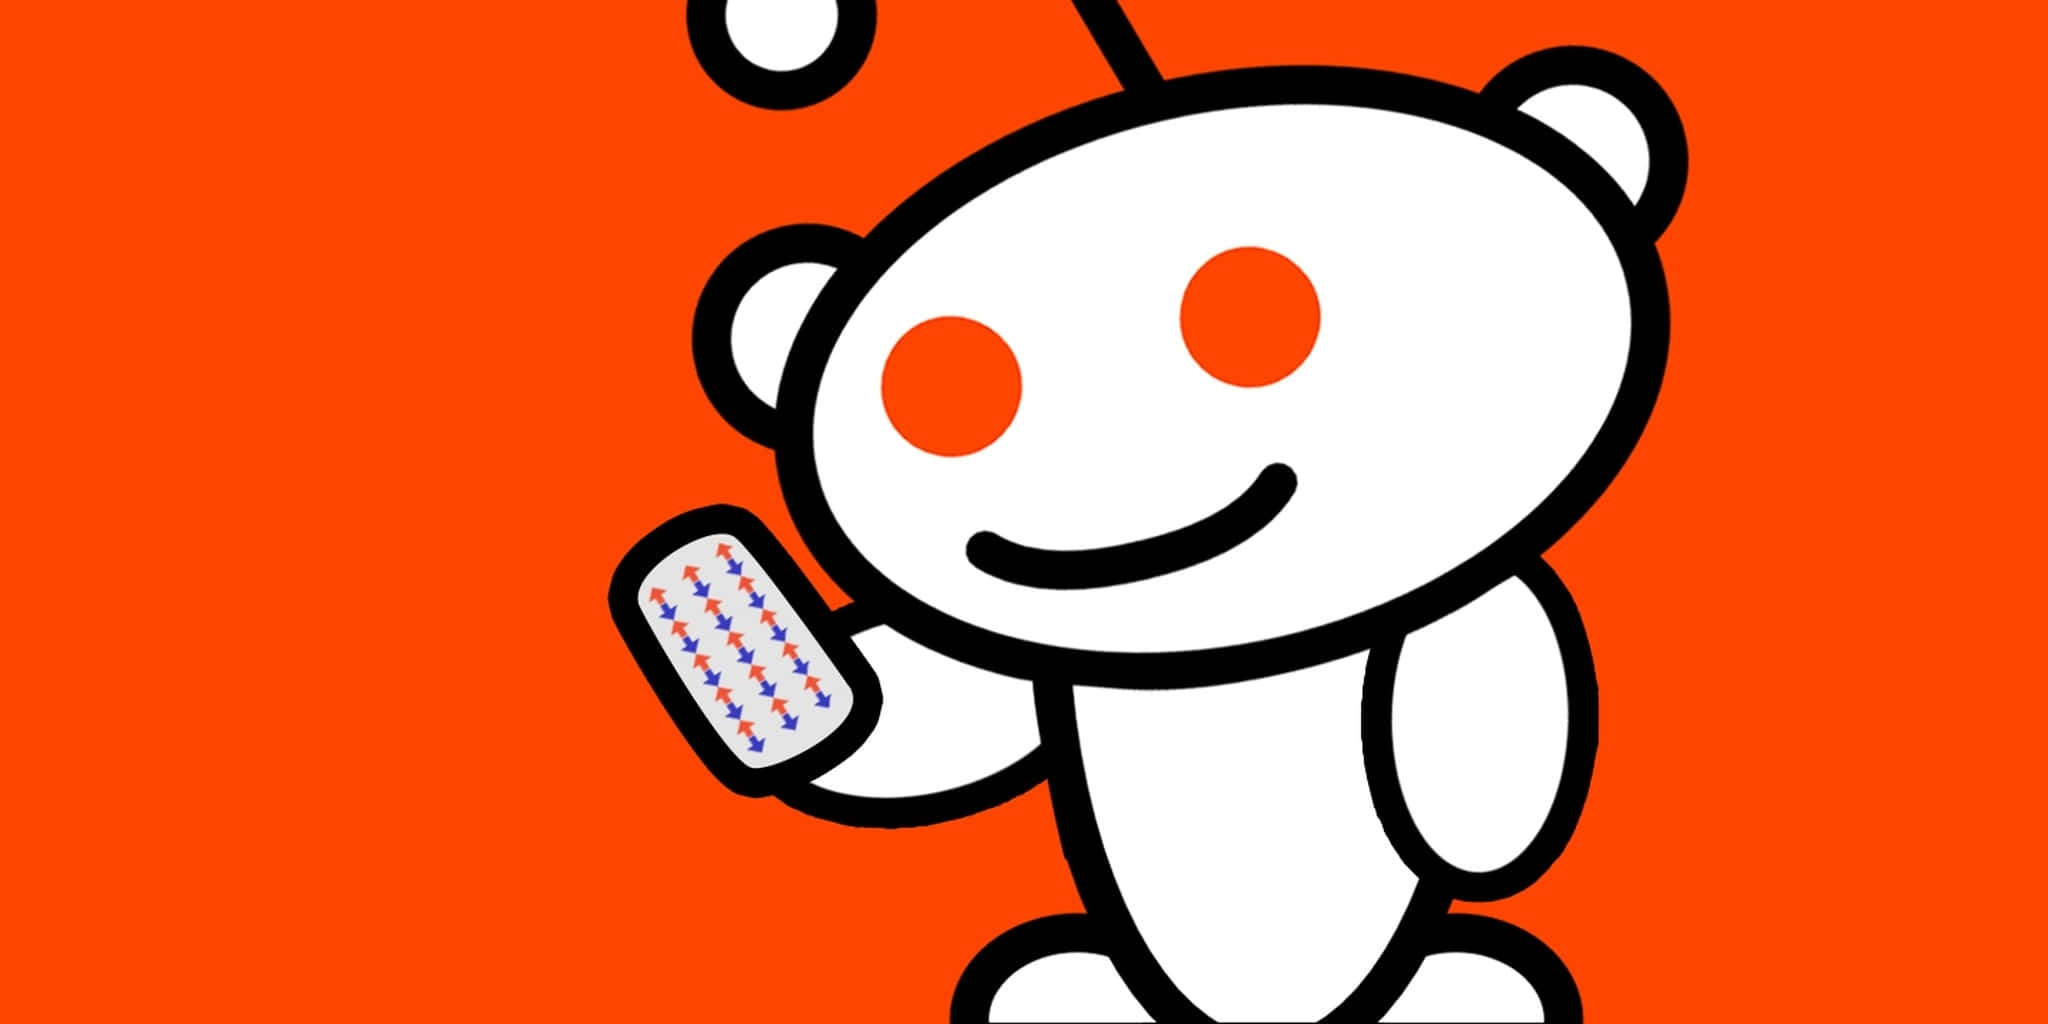 Stay Up to Date With the Latest Reddit Posts